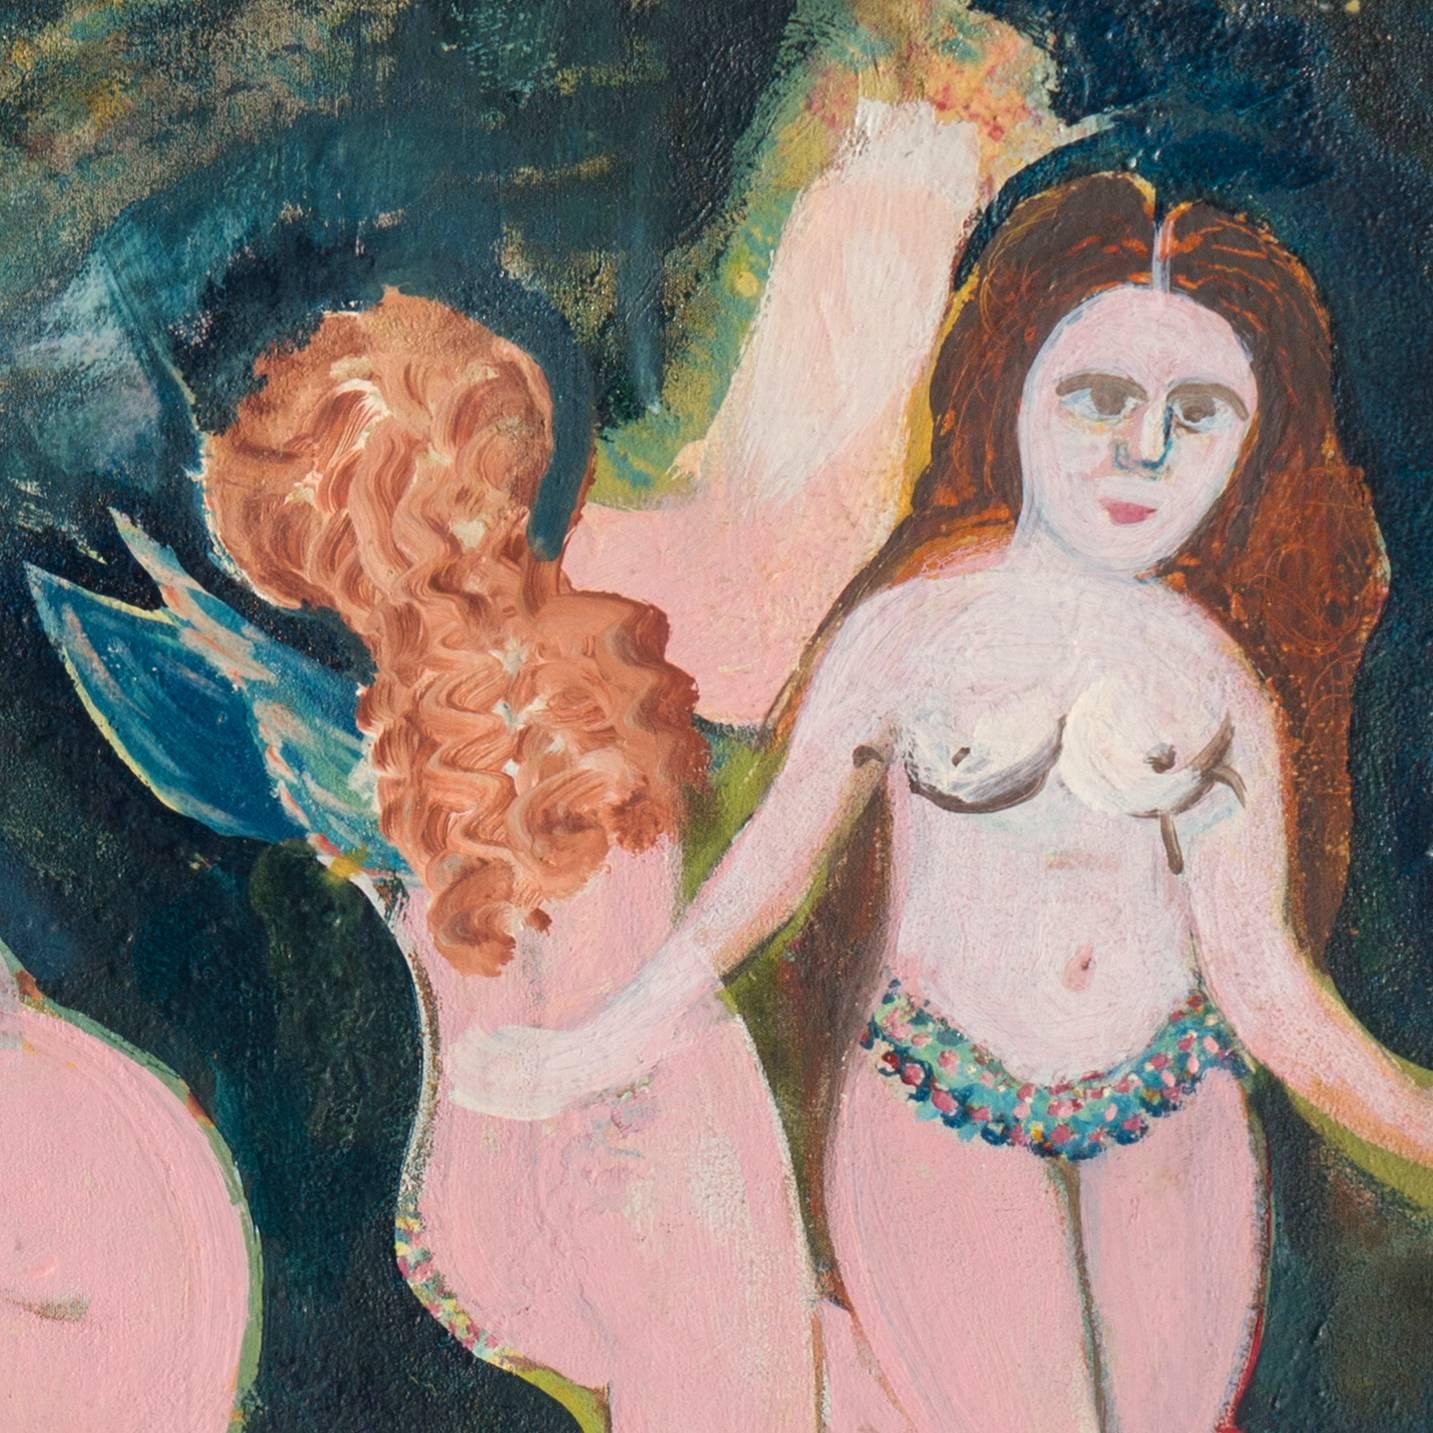 Dancing Fairies   (Outsider Art, Woman Artist, Ames Gallery, Oakland Museum) - Black Figurative Painting by Ursula Barnes